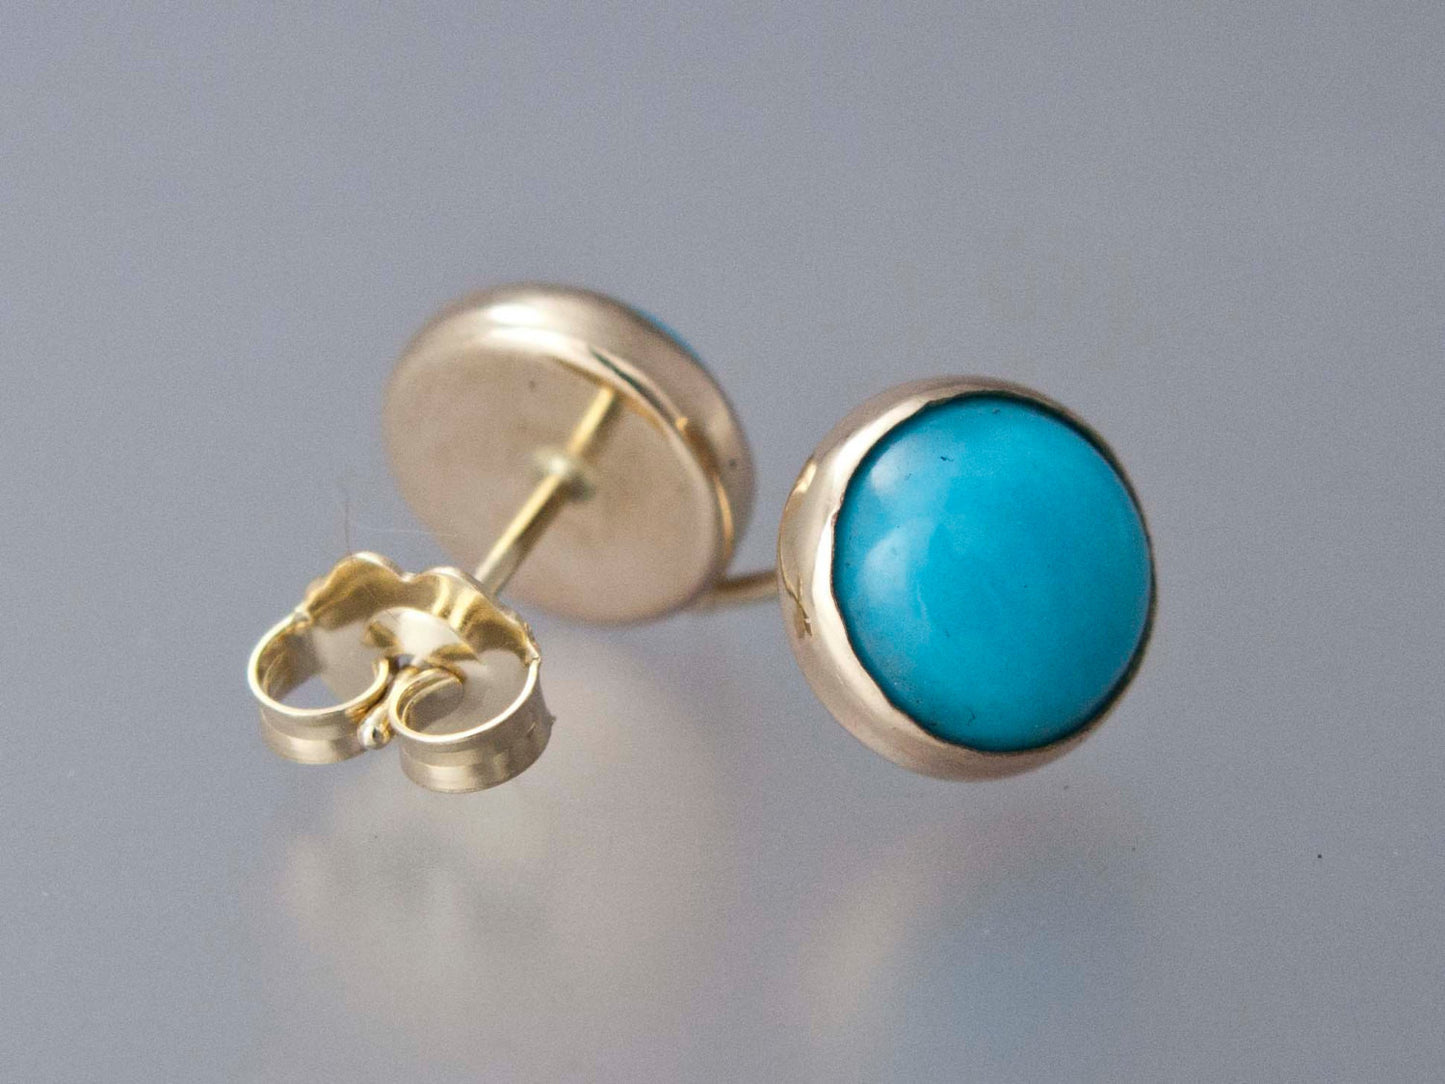 Large Turquoise Gold Studs - 8mm round cabochon bezel earrings